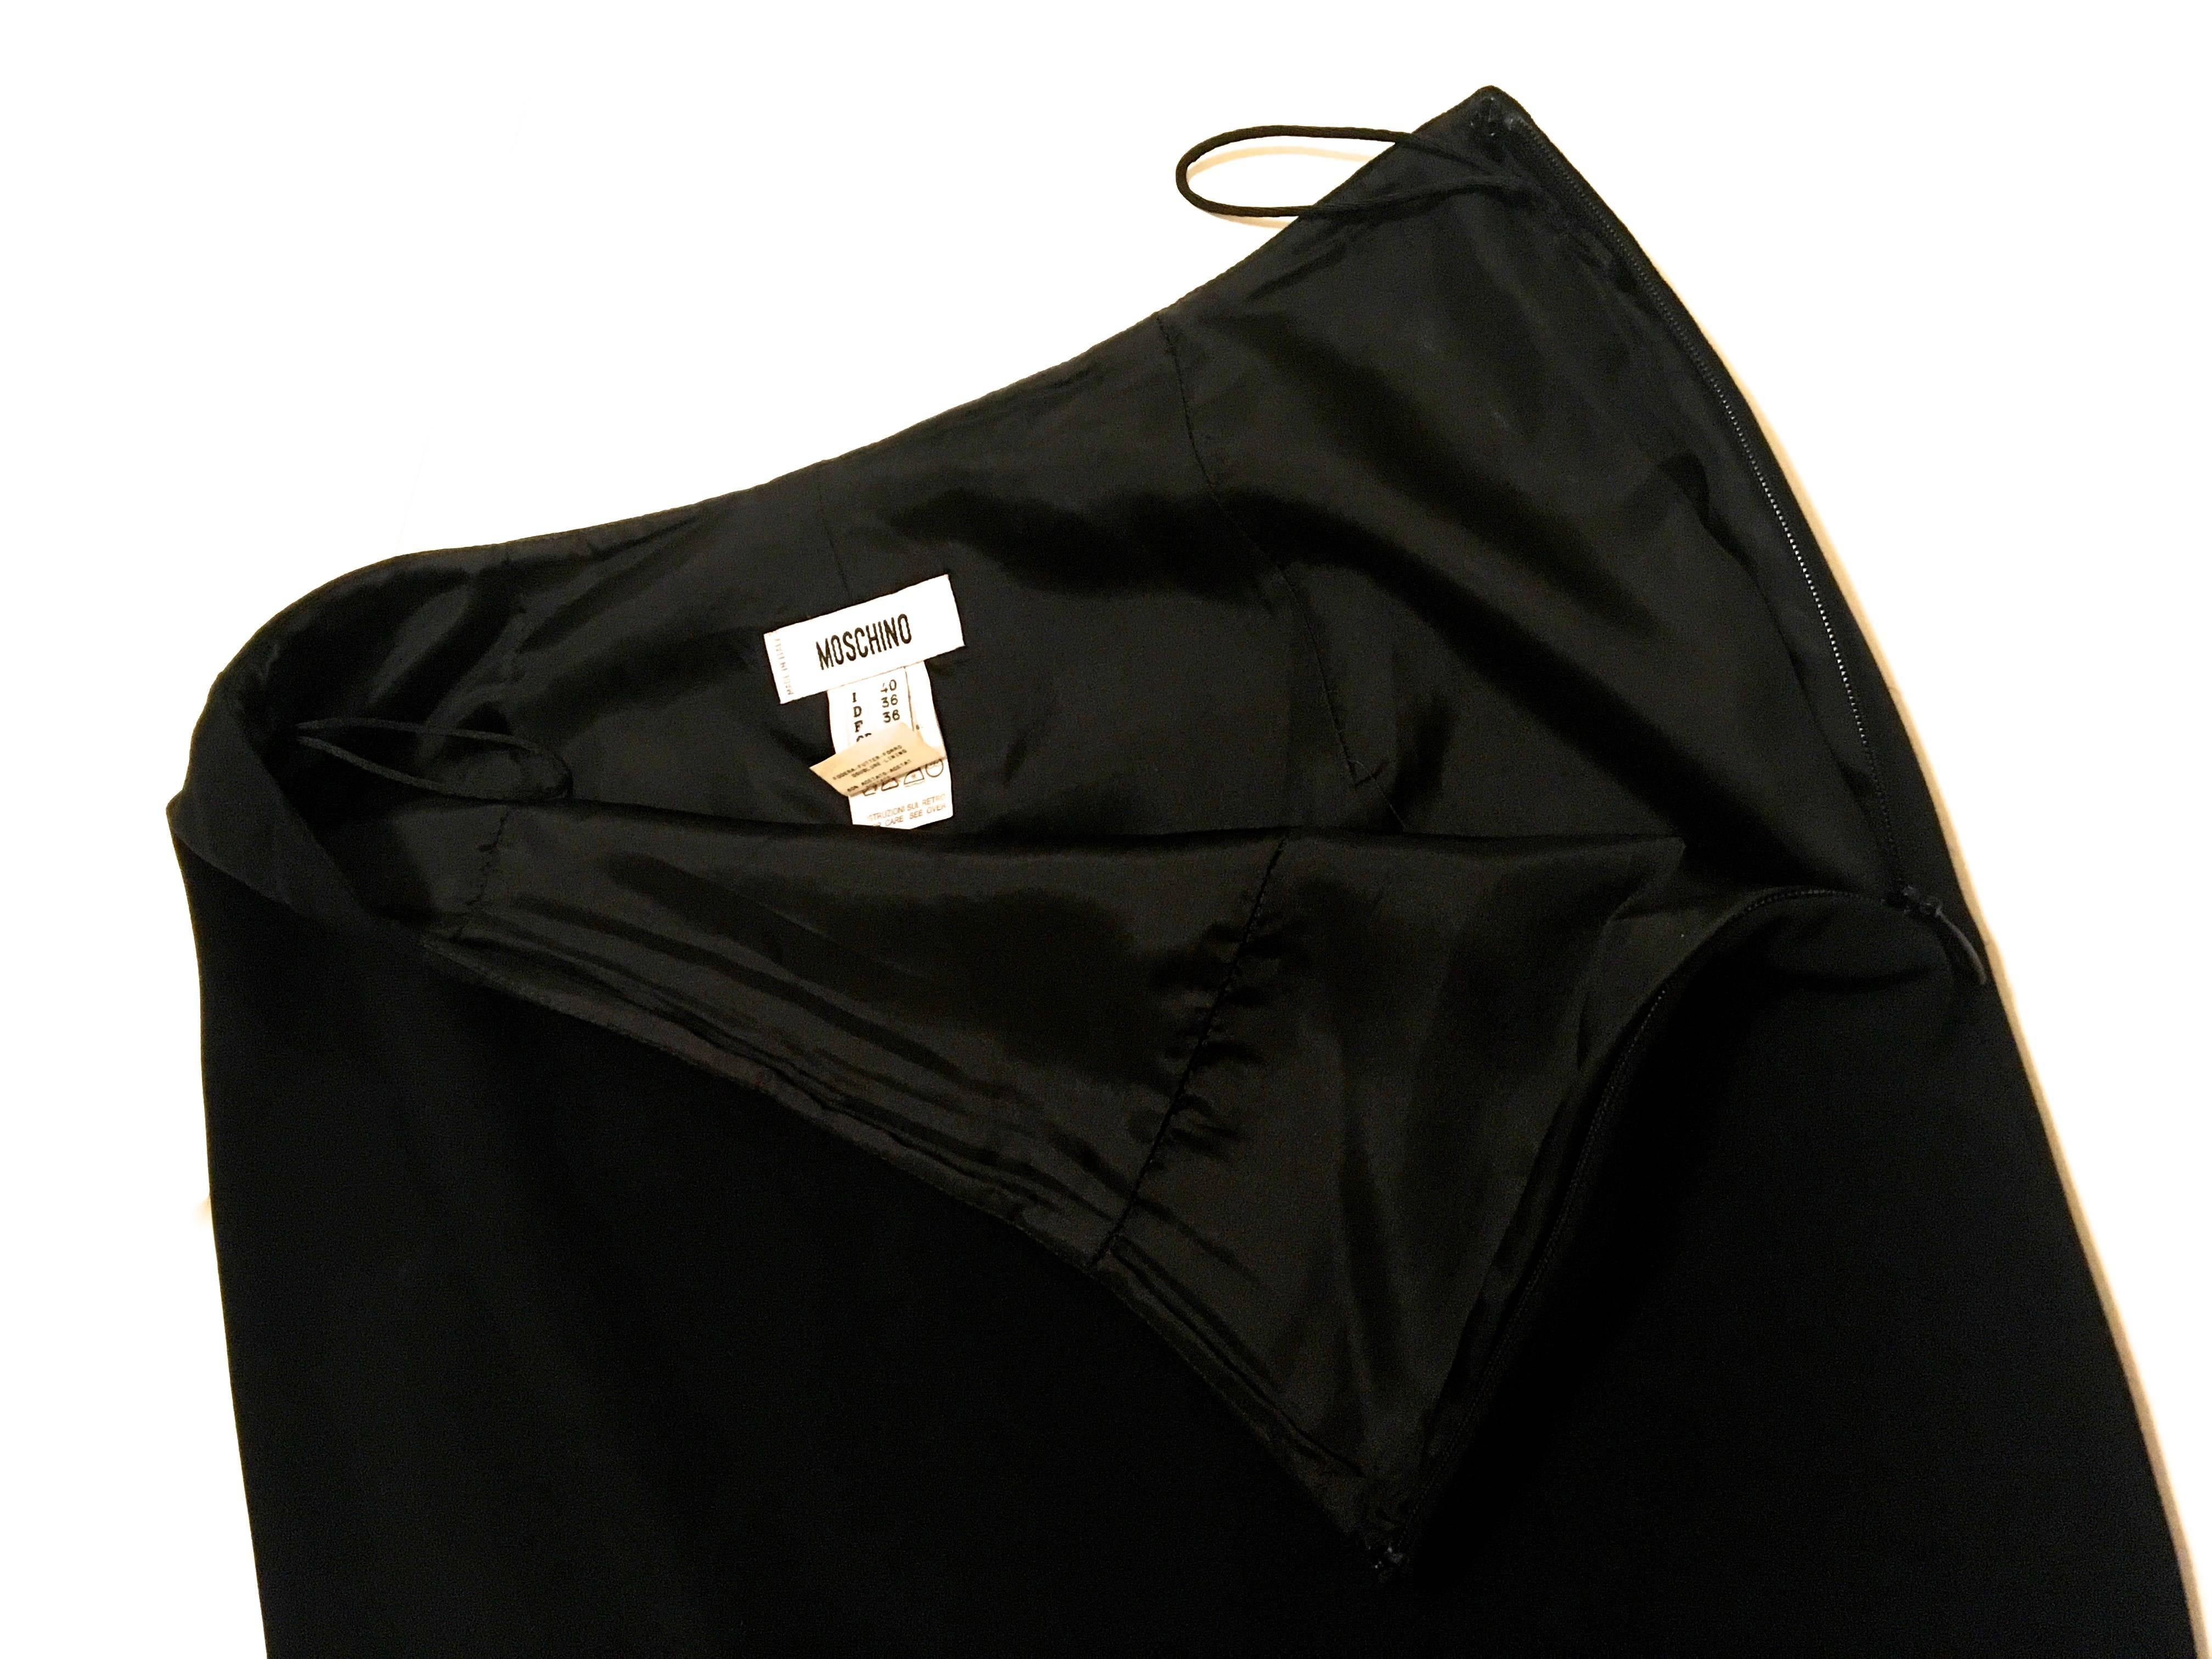 Moschino Skirt - Like New - Black  Skirt with Floral Trim For Sale 4